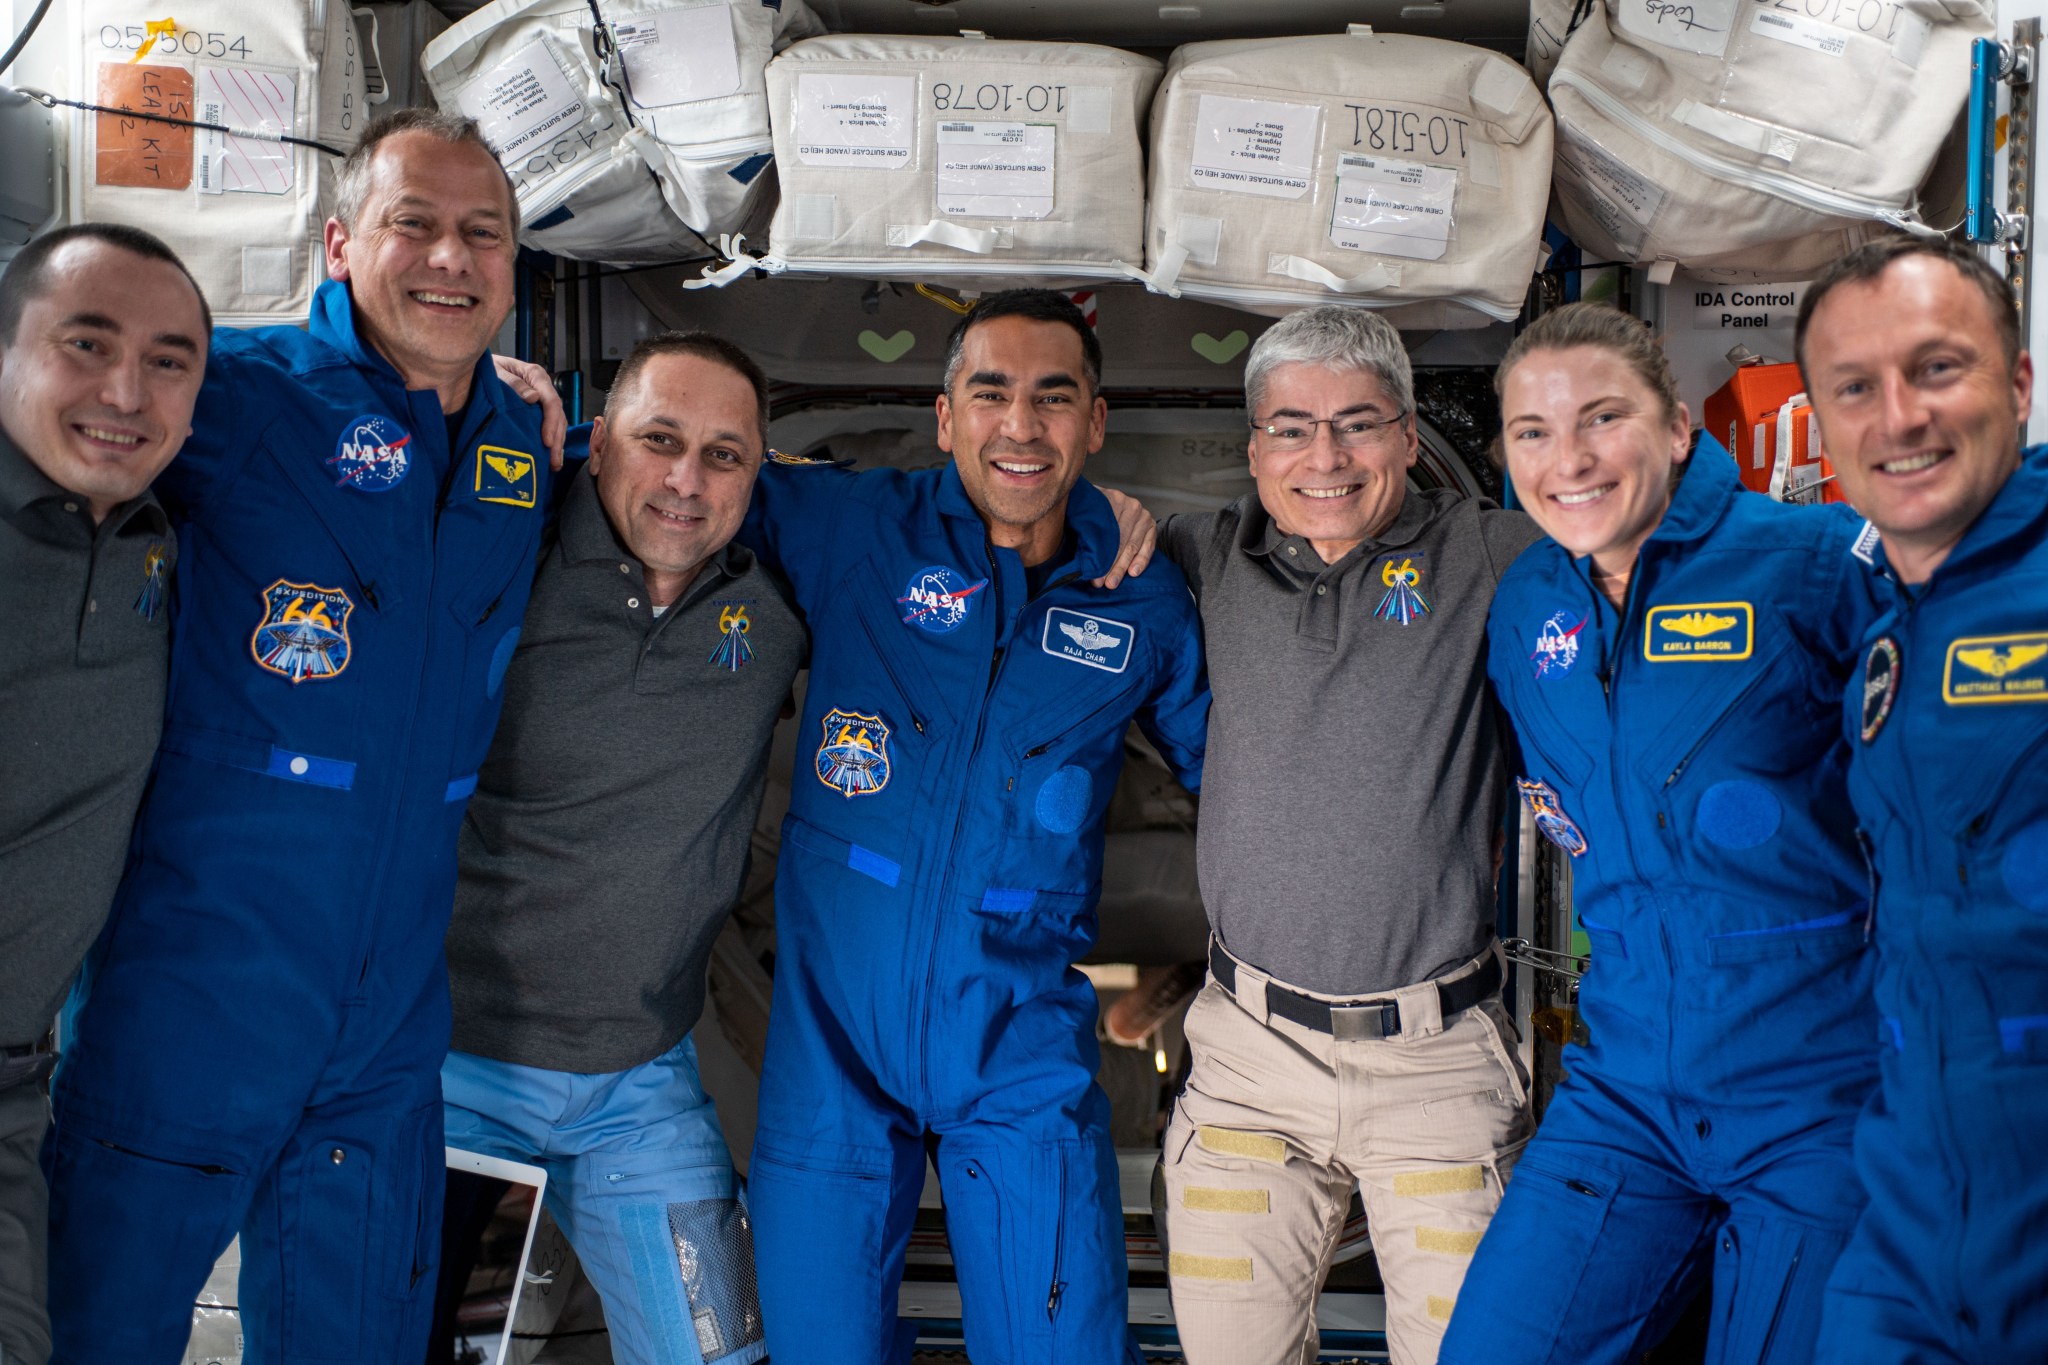 The Expedition 66 crew poses for a photo after SpaceX Crew-3’s arrival to the International Space Station.